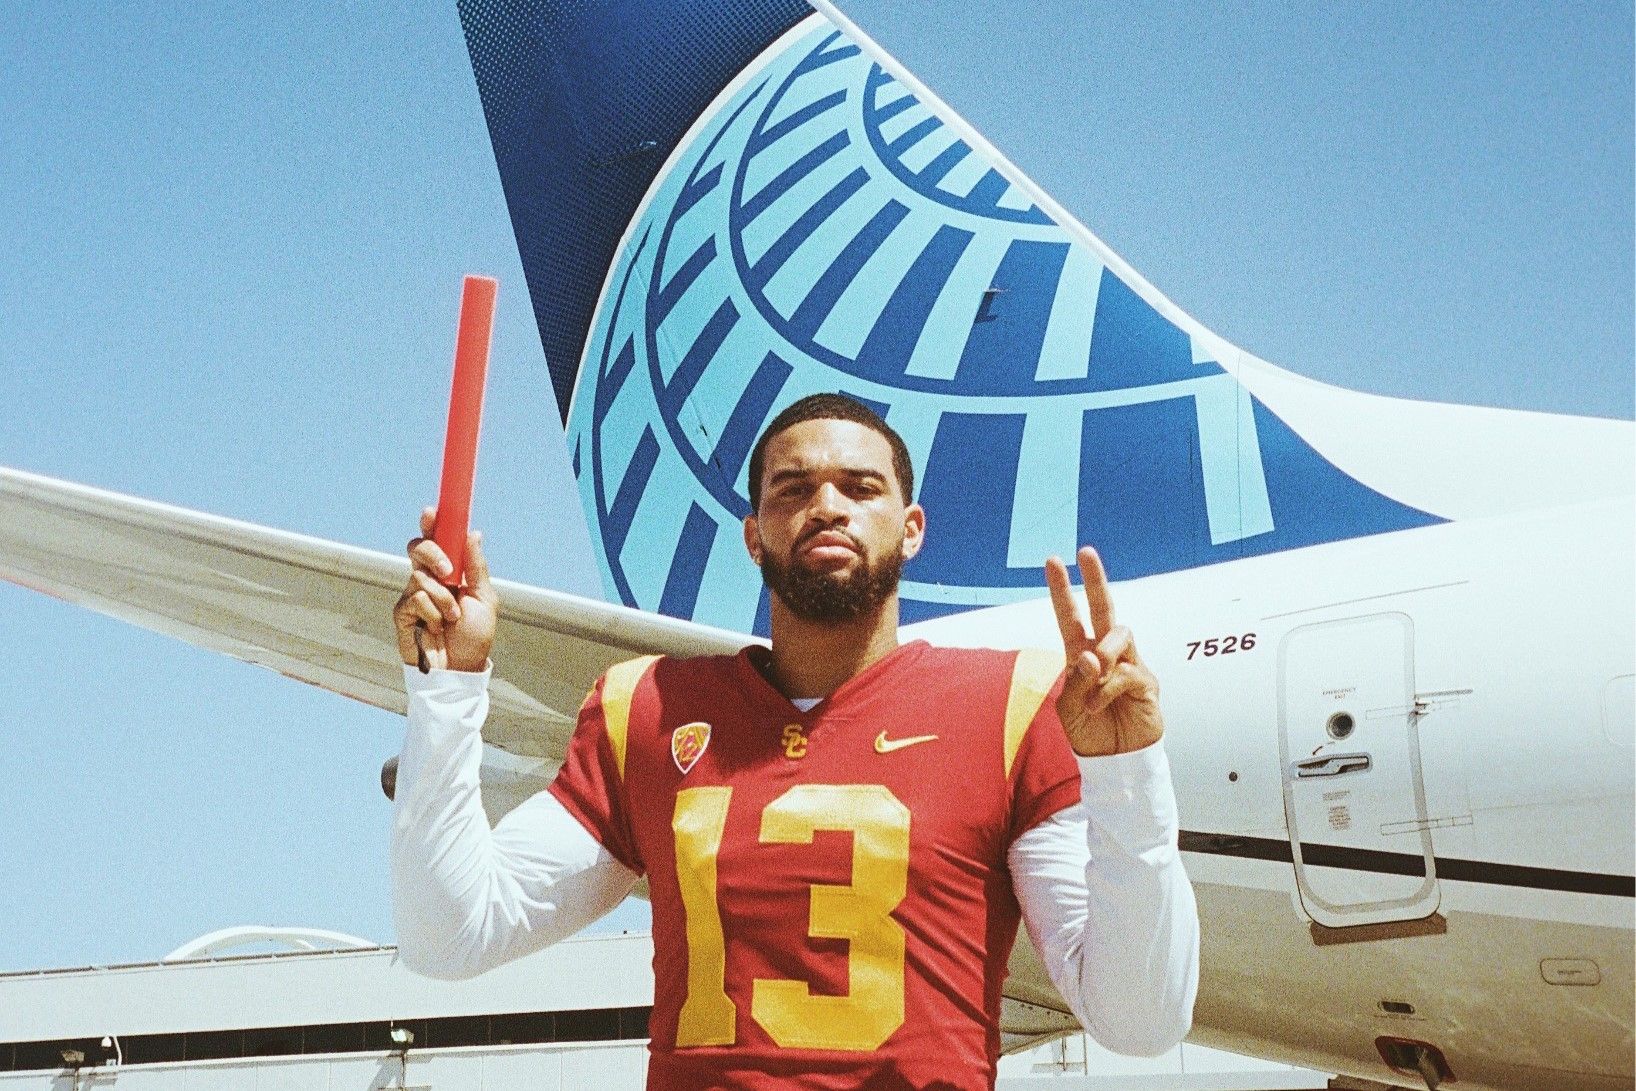 USC Trojans quarterback Caleb Williams in partnership with United Airlines